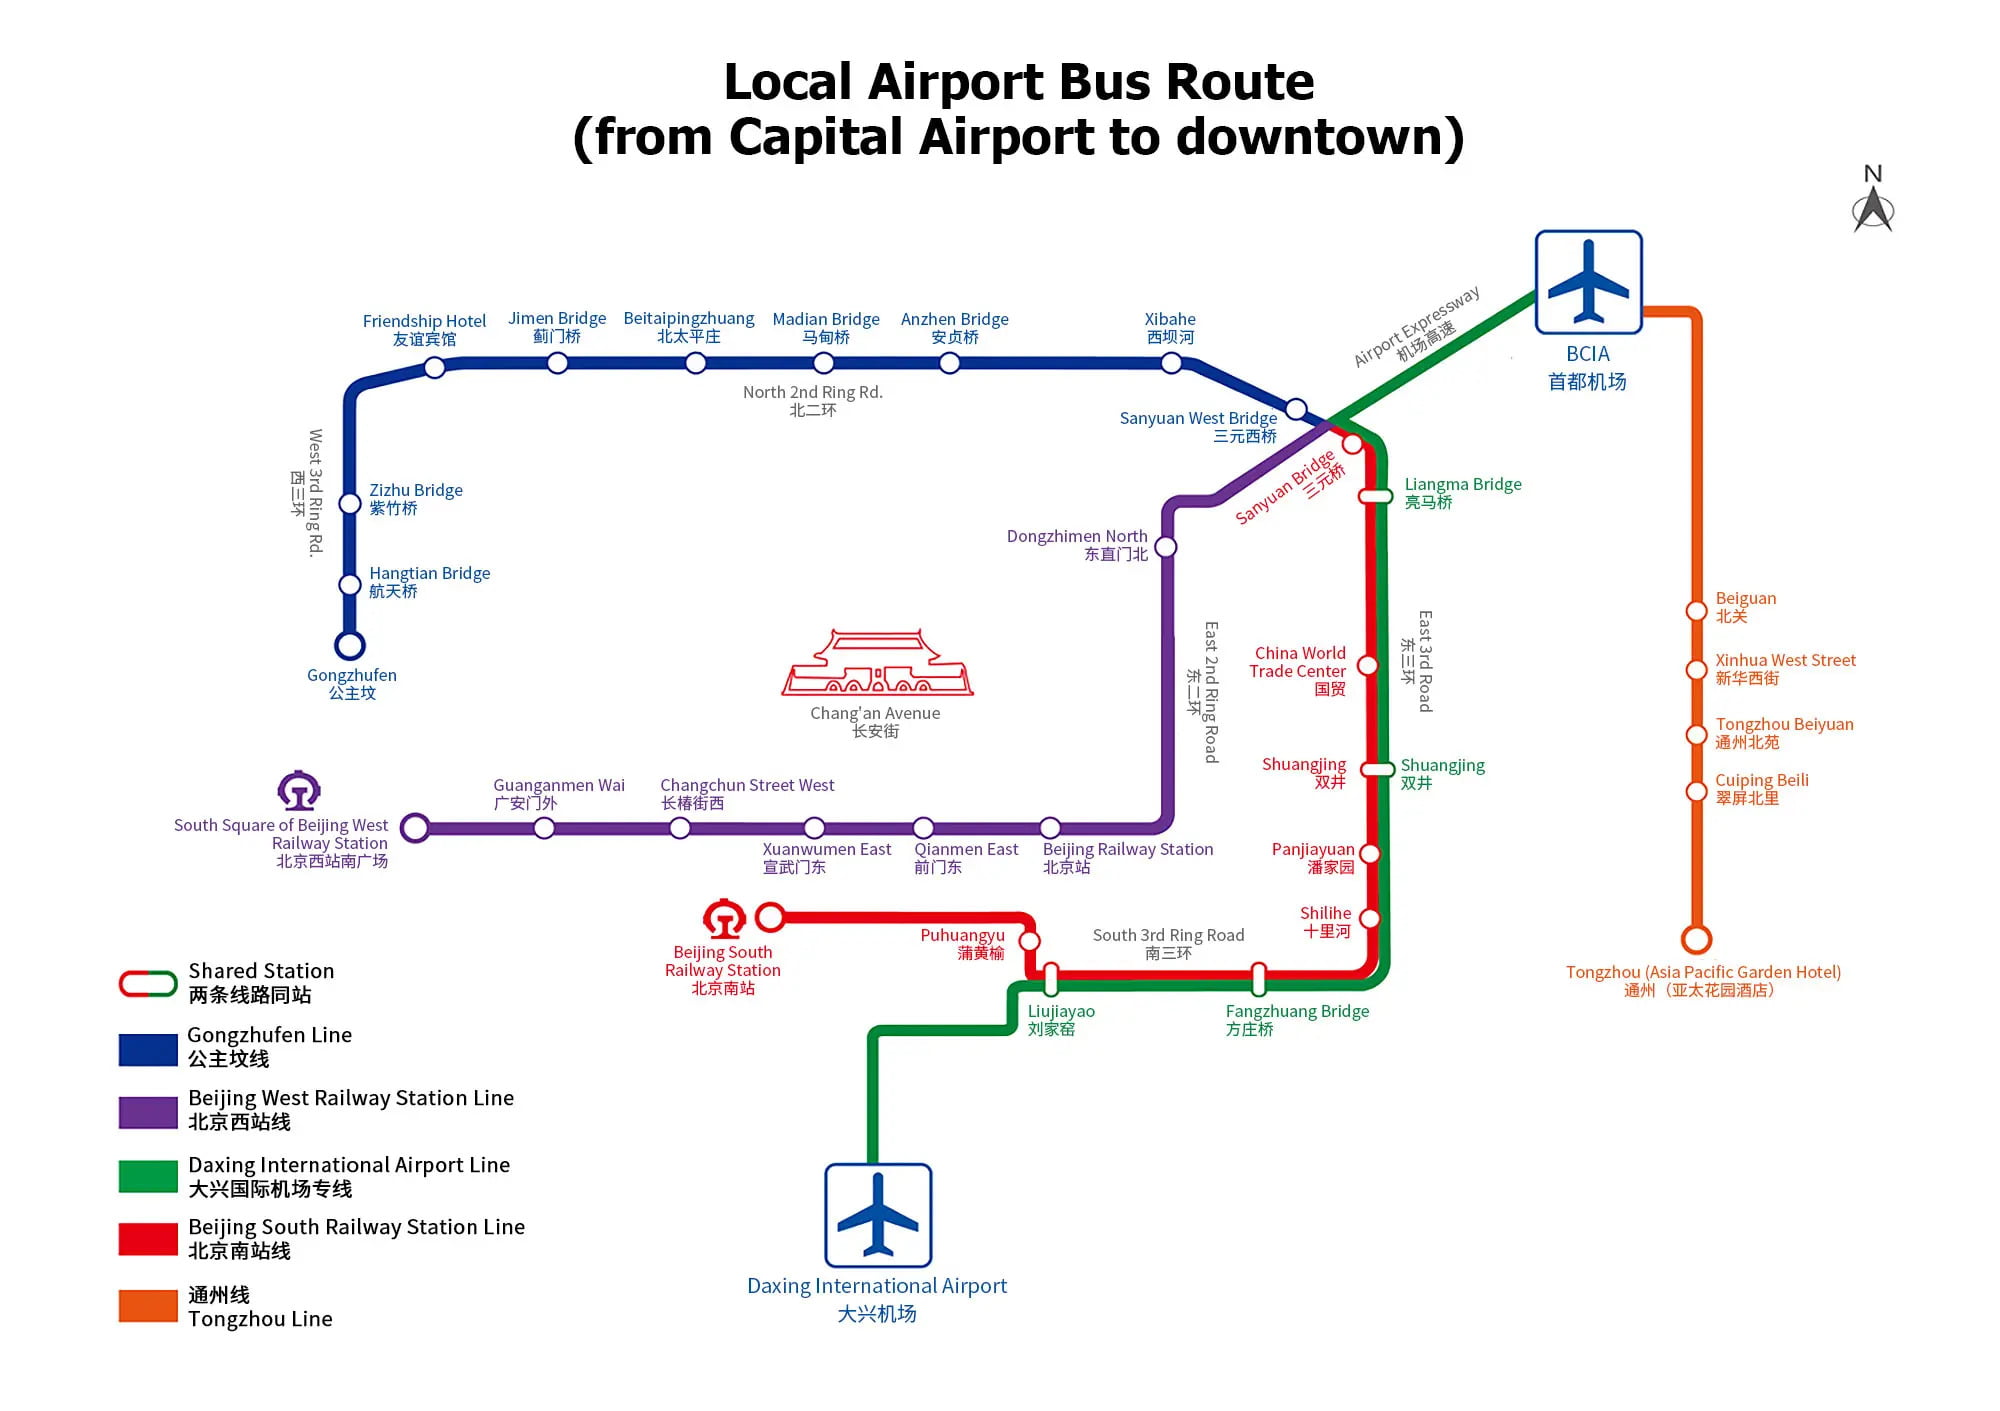 Bus Routes from Capital Airport to Downtown